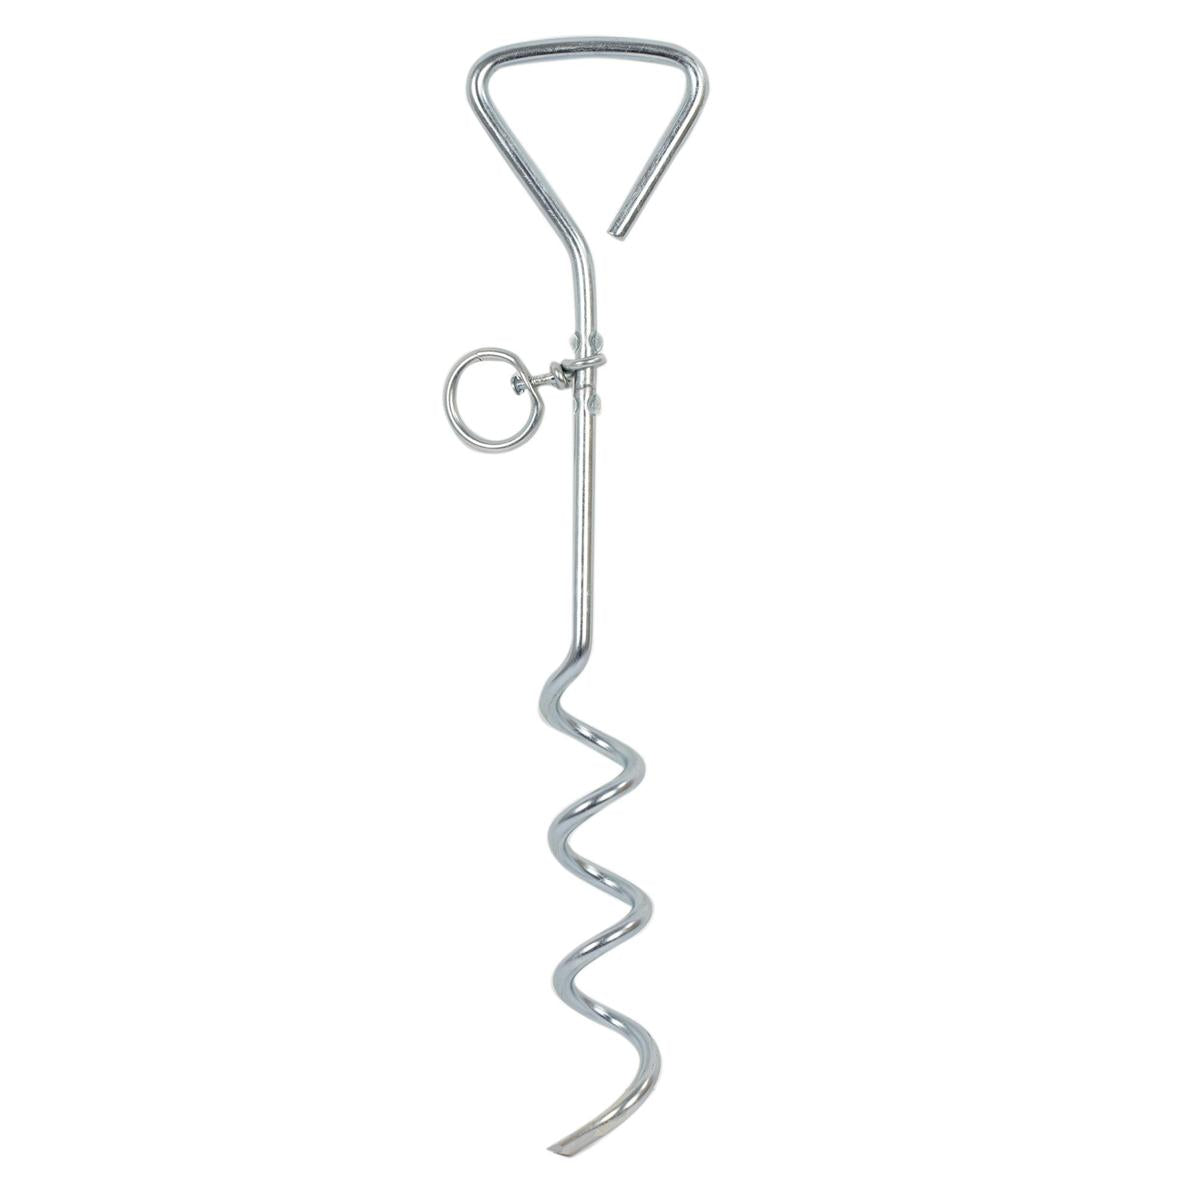 PAWS Metal Spiral Dog Tie-Out Stake